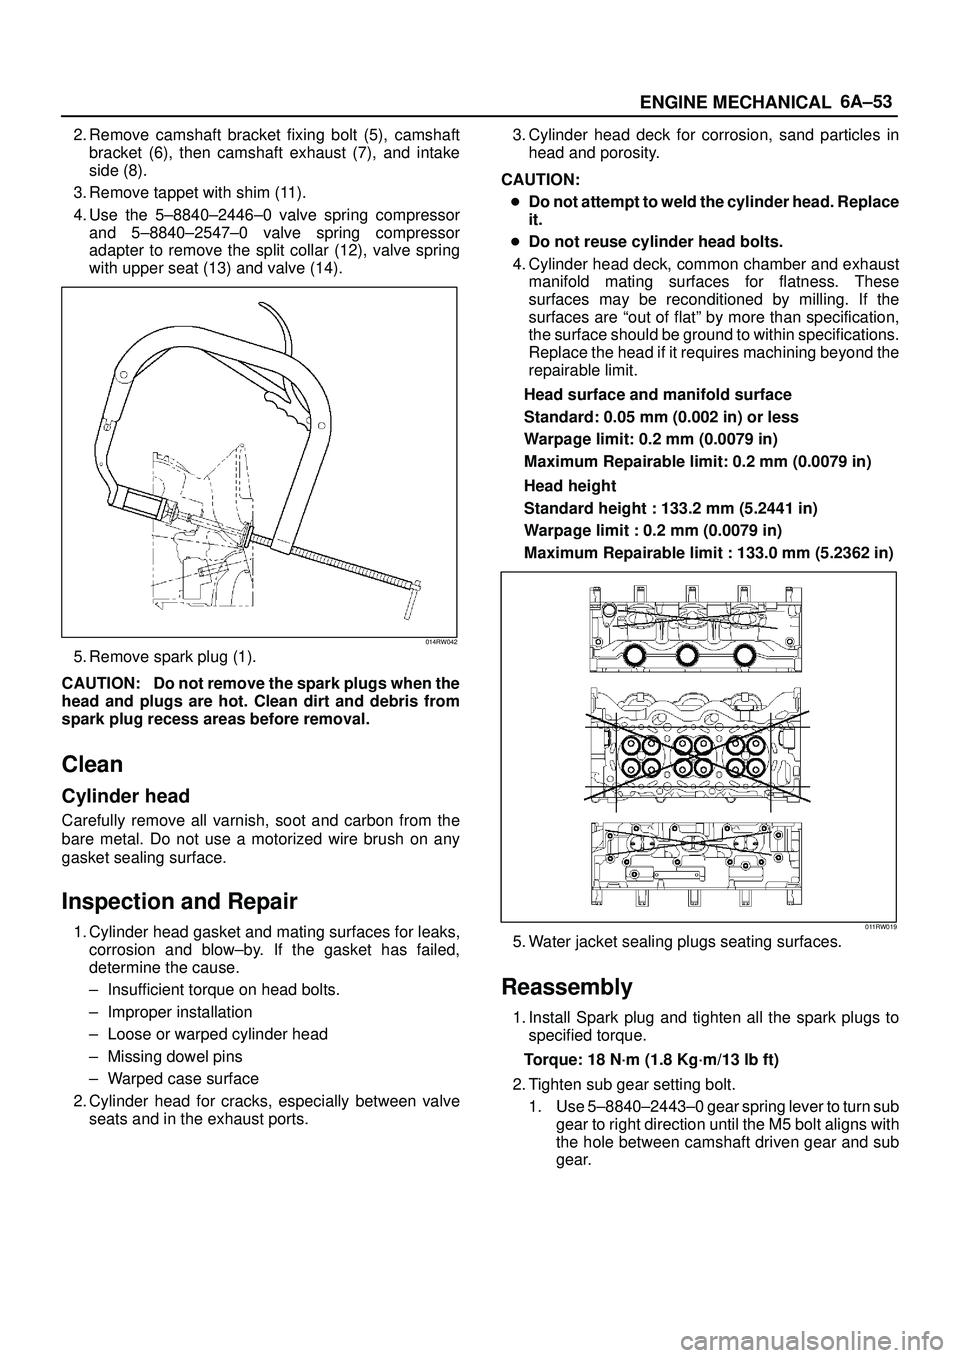 ISUZU TROOPER 1998  Service Repair Manual 6A±53
ENGINE MECHANICAL
2. Remove camshaft bracket fixing bolt (5), camshaft
bracket (6), then camshaft exhaust (7), and intake
side (8).
3. Remove tappet with shim (11).
4. Use the 5±8840±2446±0 